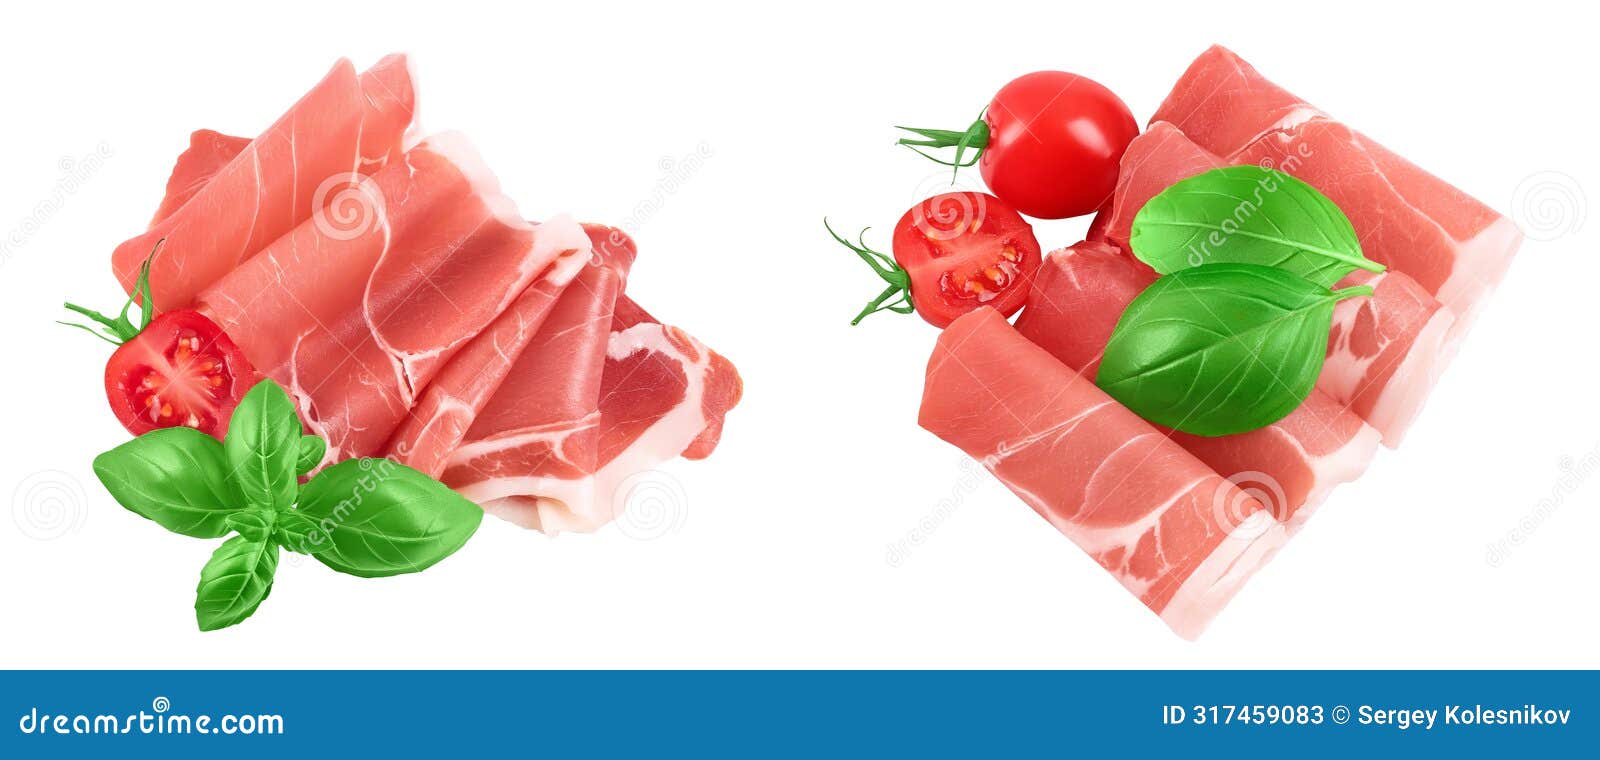 italian prosciutto crudo or spanish jamon. raw ham  on white background with full depth of field. top view. flat